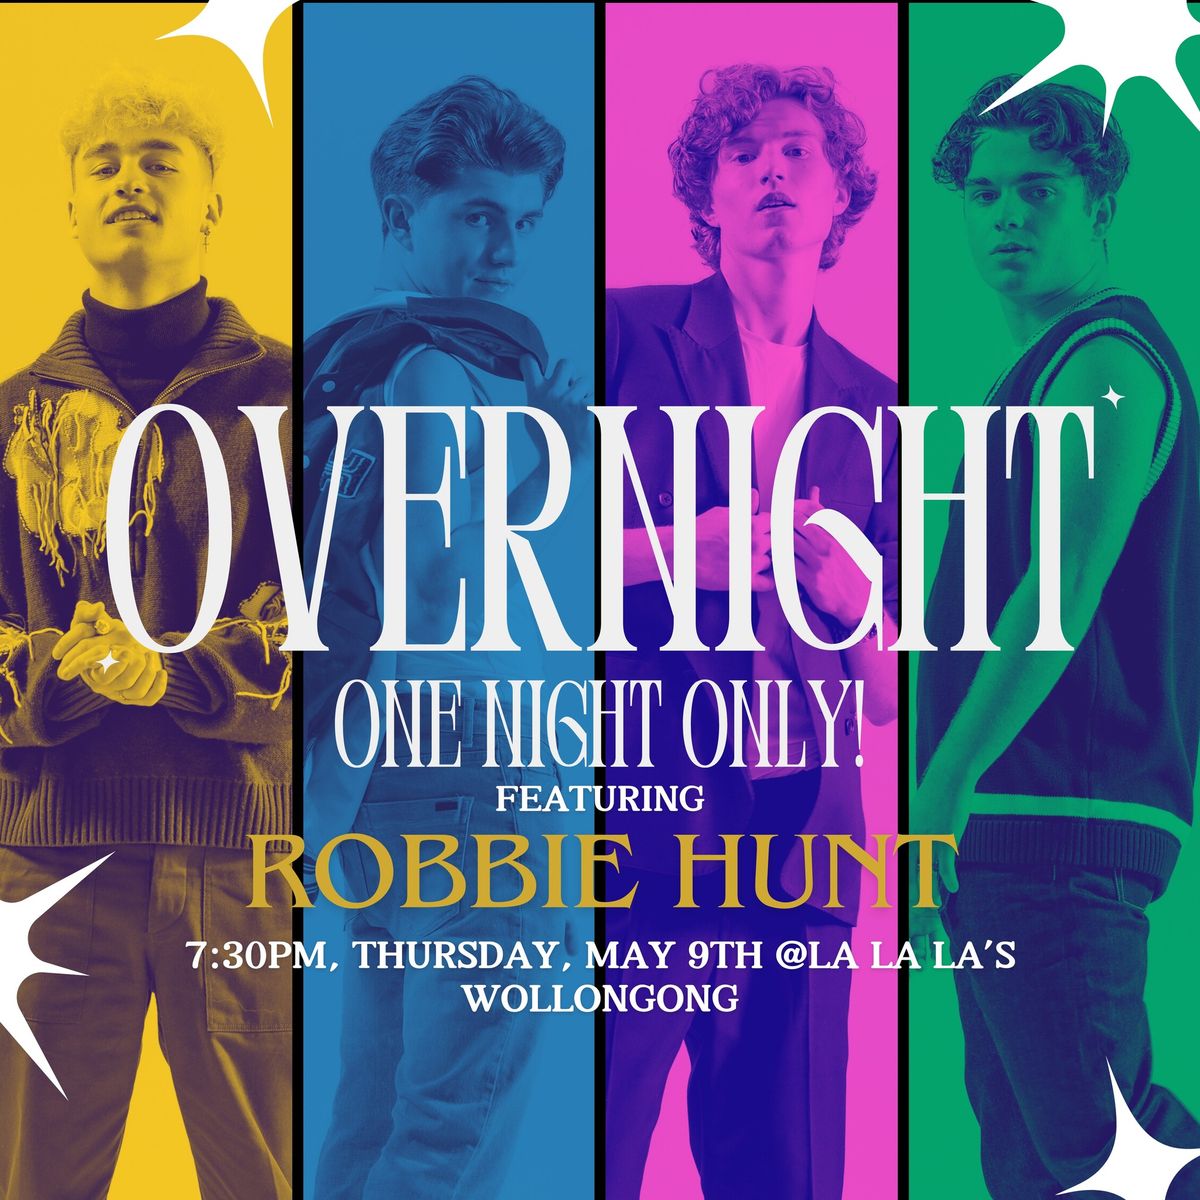 Overnight - One Night Only! Featuring: Robbie Hunt 